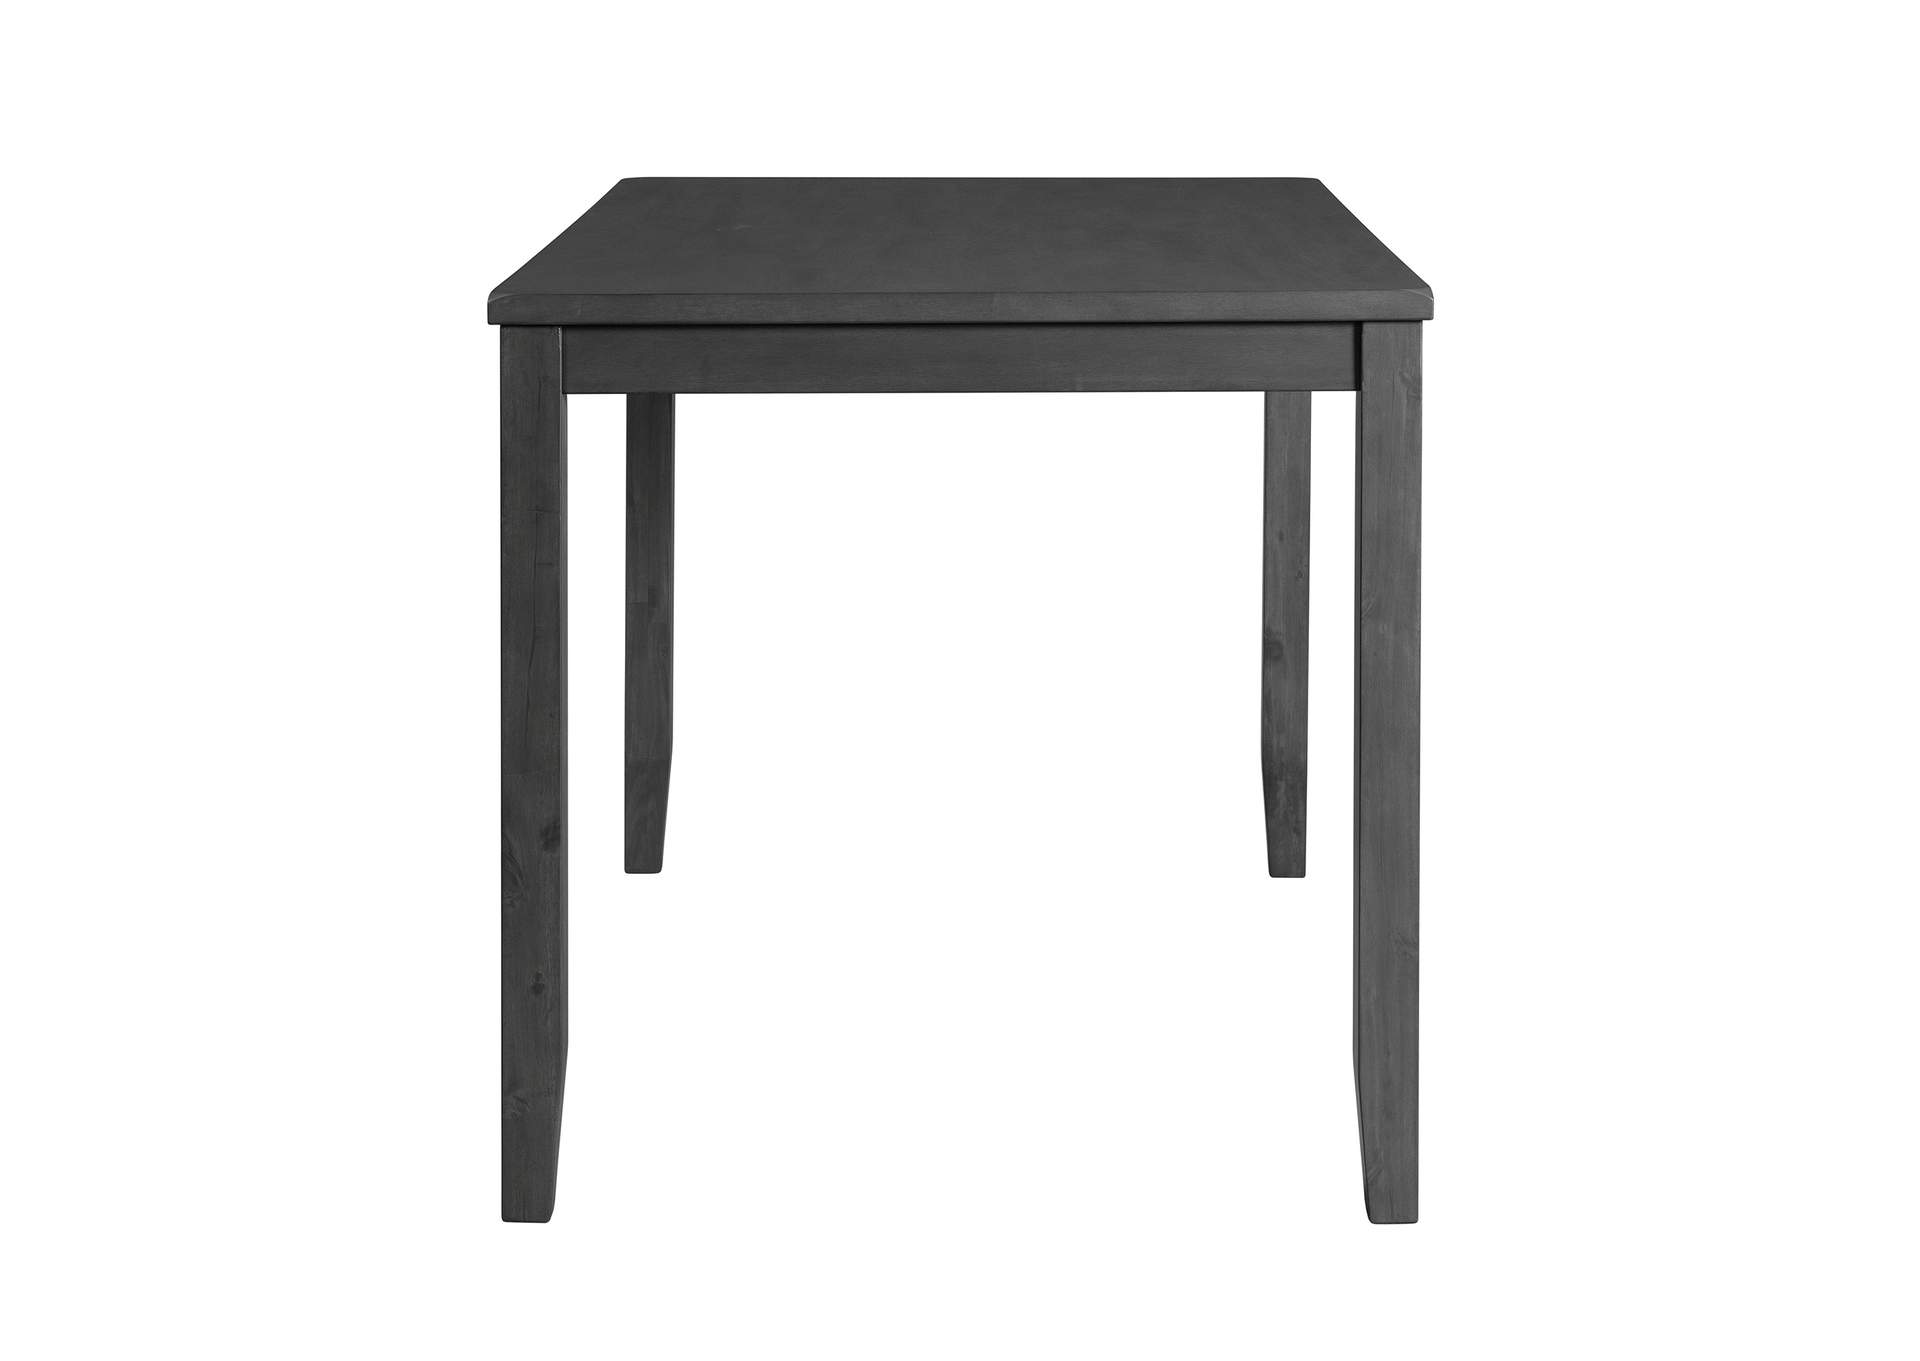 Alex Grey 60 7 Pc Counter Set Grey Table With Black Pu Seat,Elements